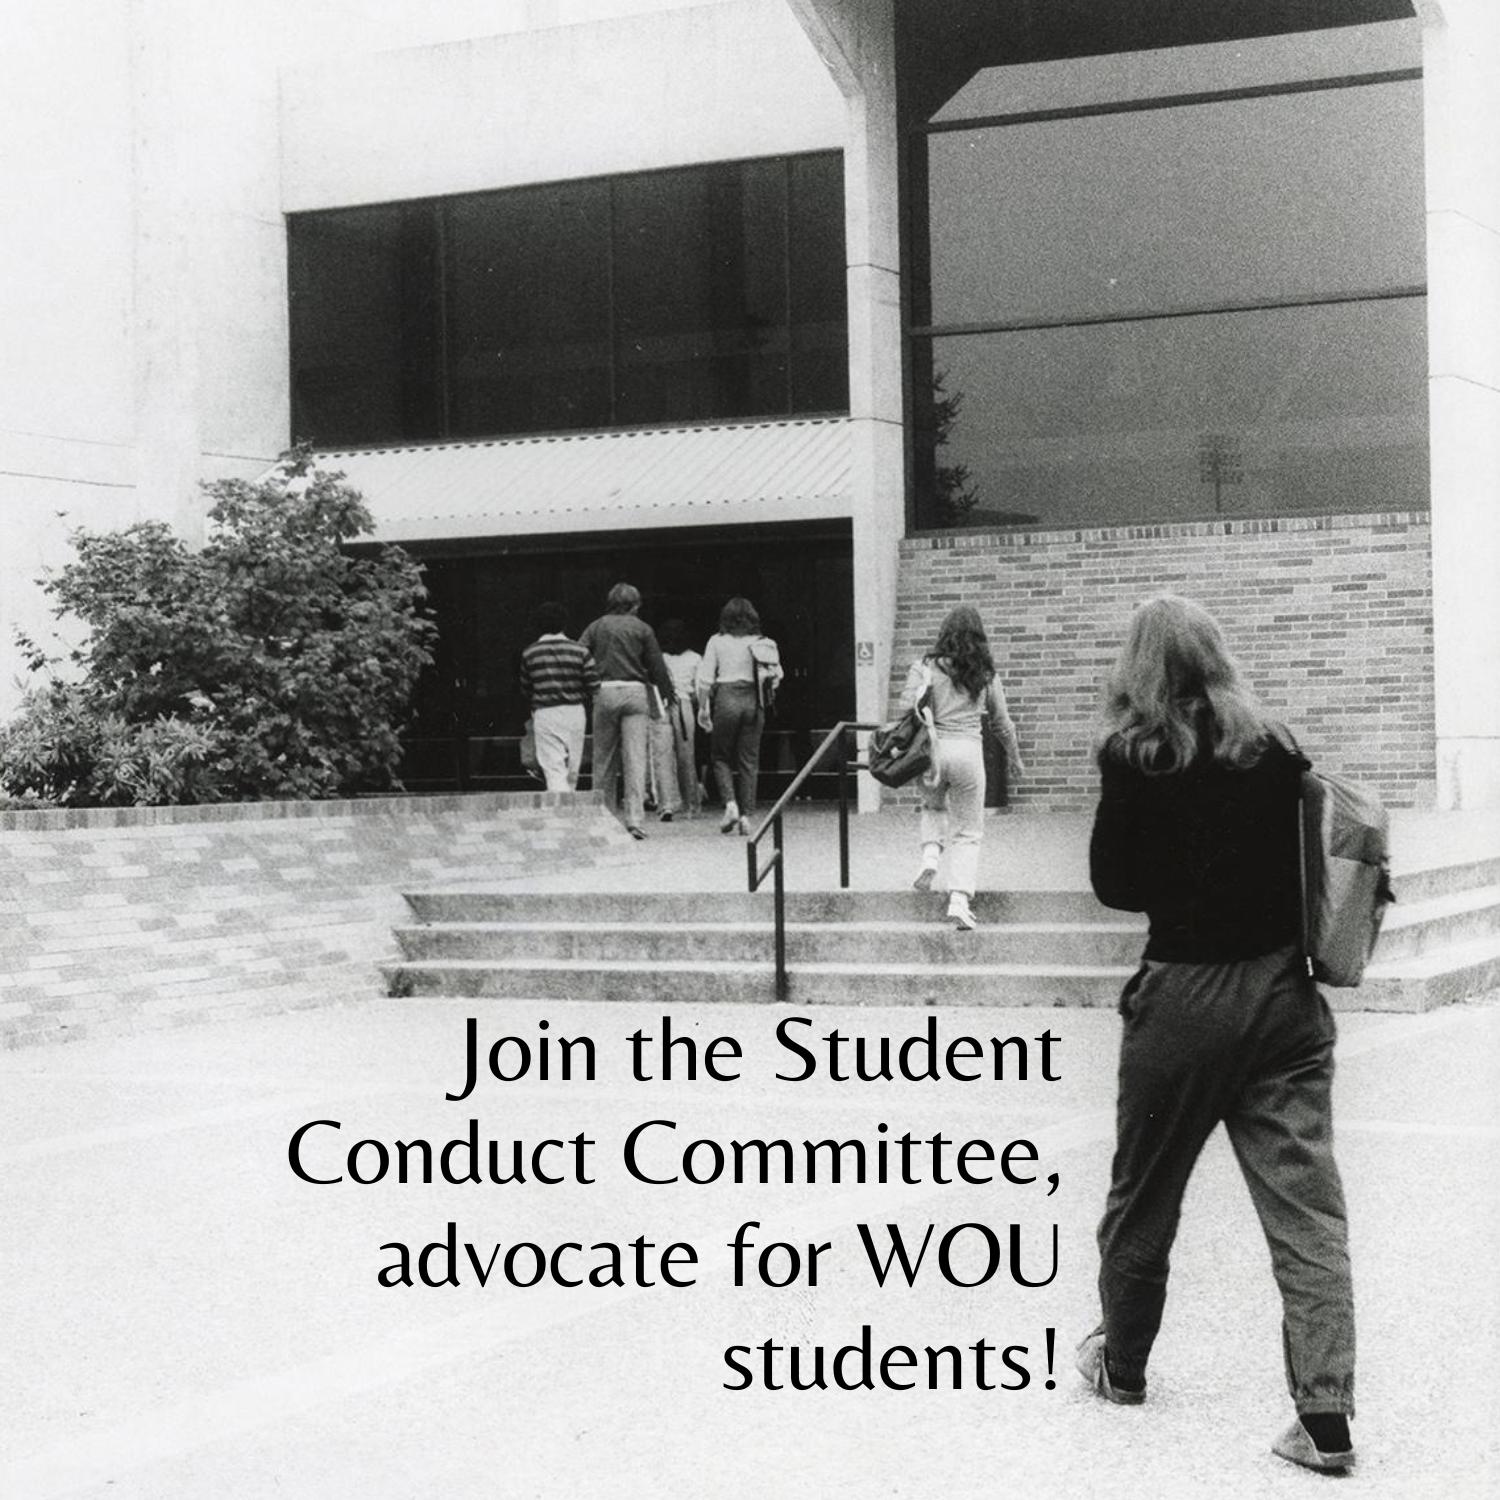 Black and white image from 1971 of students entering New Physical Education. Overlaid is the text "Join the Student Conduct Committee, advocate for WOU students!"